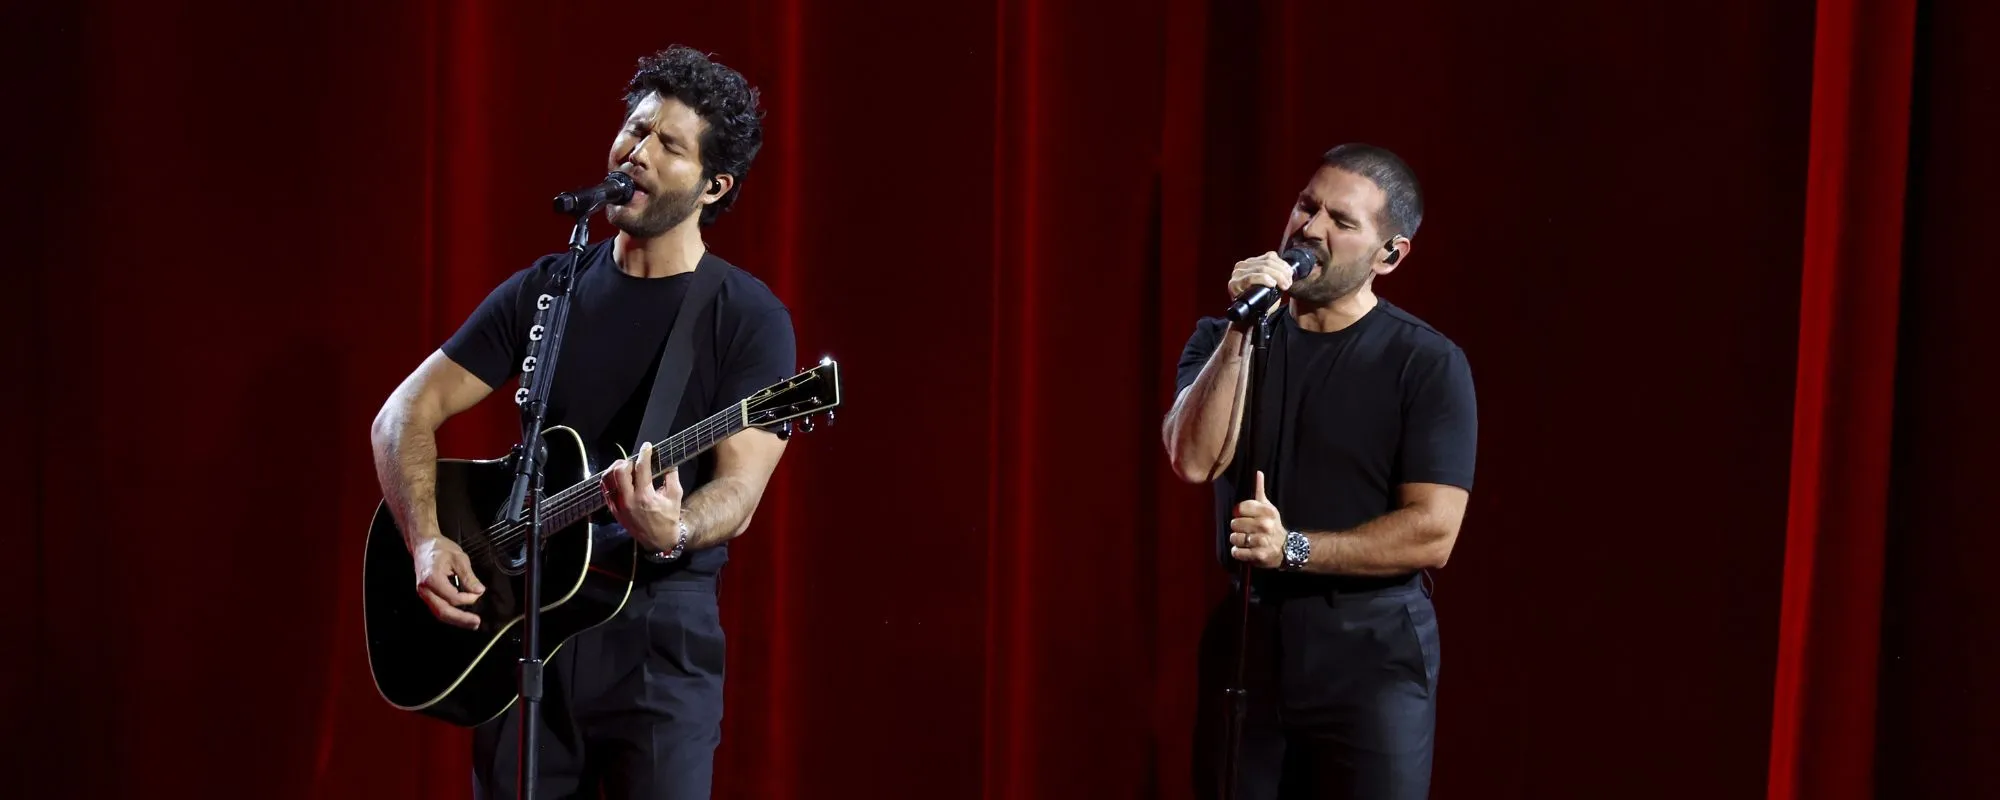 Are Dan + Shay Brothers? 5 Quick Facts About ‘The Voice’ Coaching Tandem